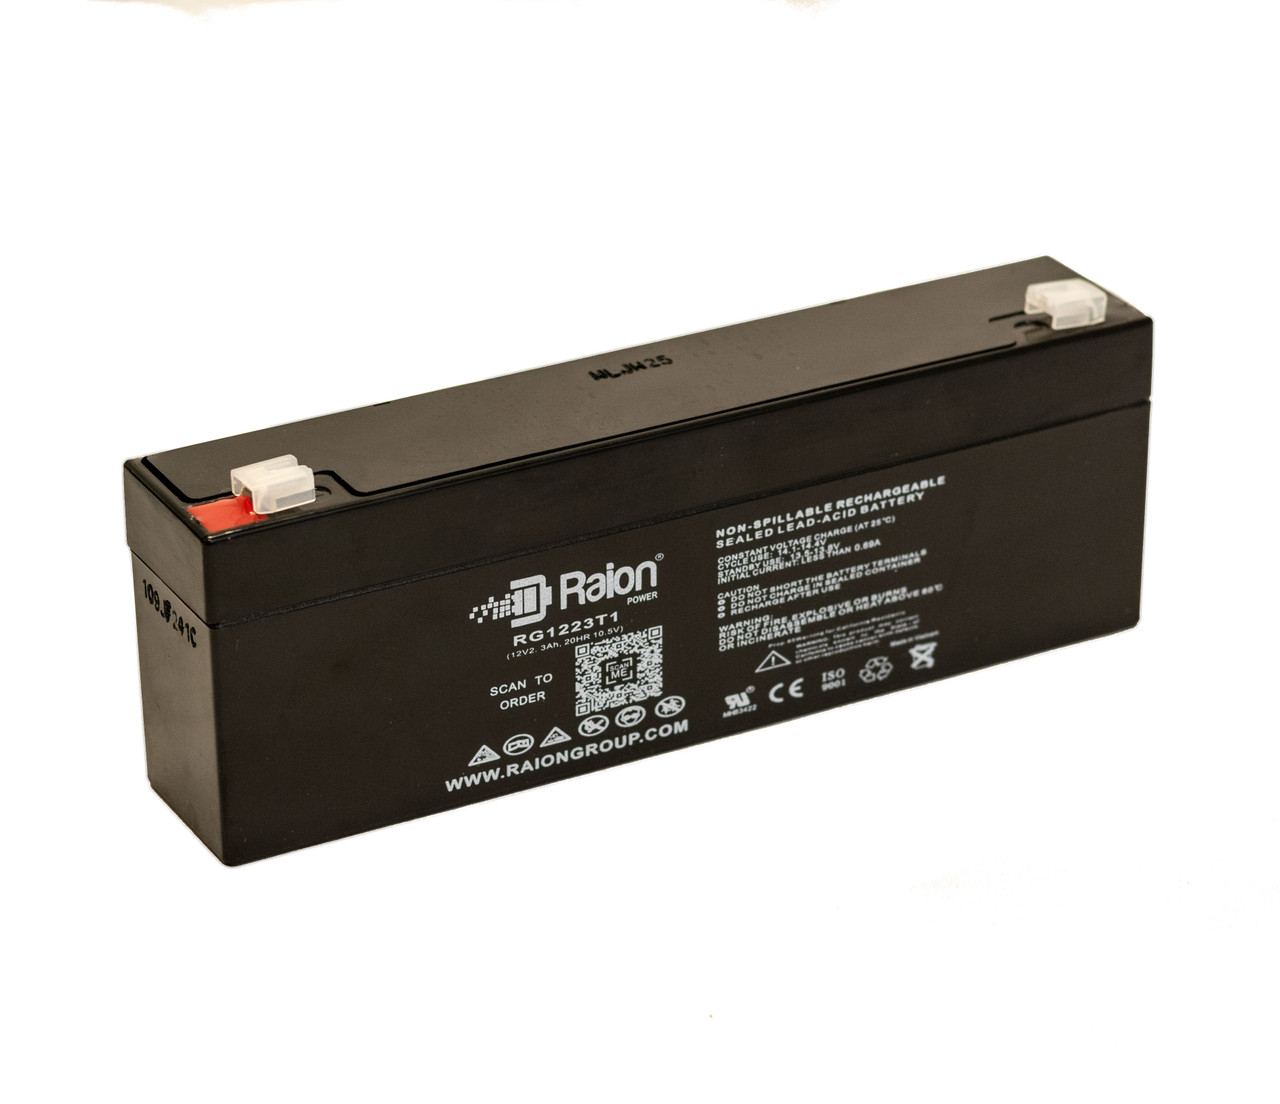 Raion Power RG1223T1 Replacement Battery for MK ES1.9-12